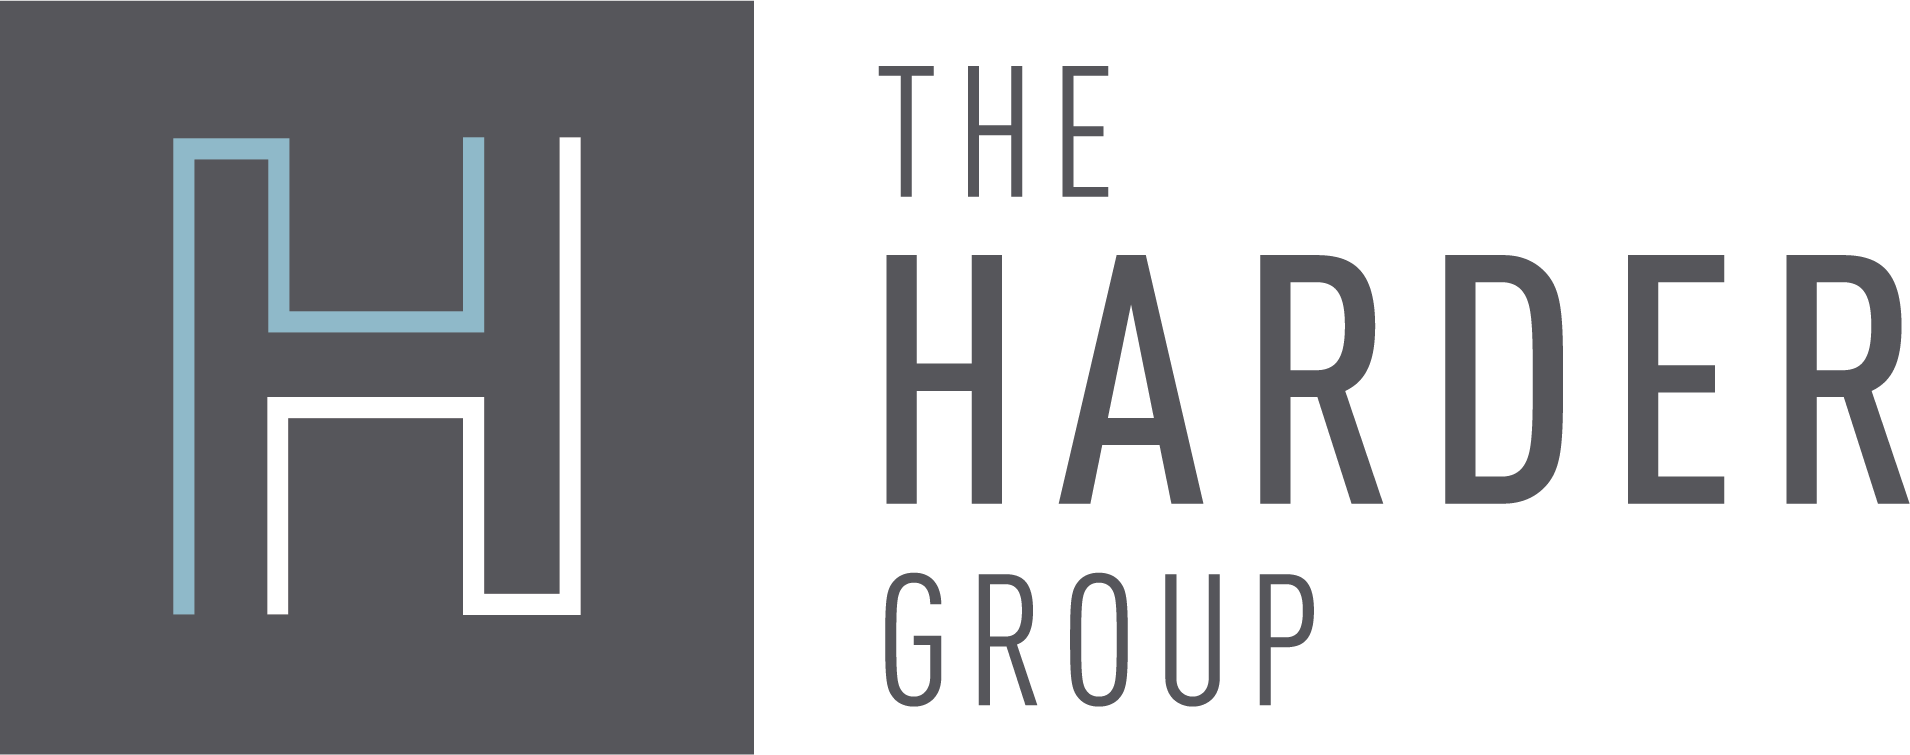 The Harder Group